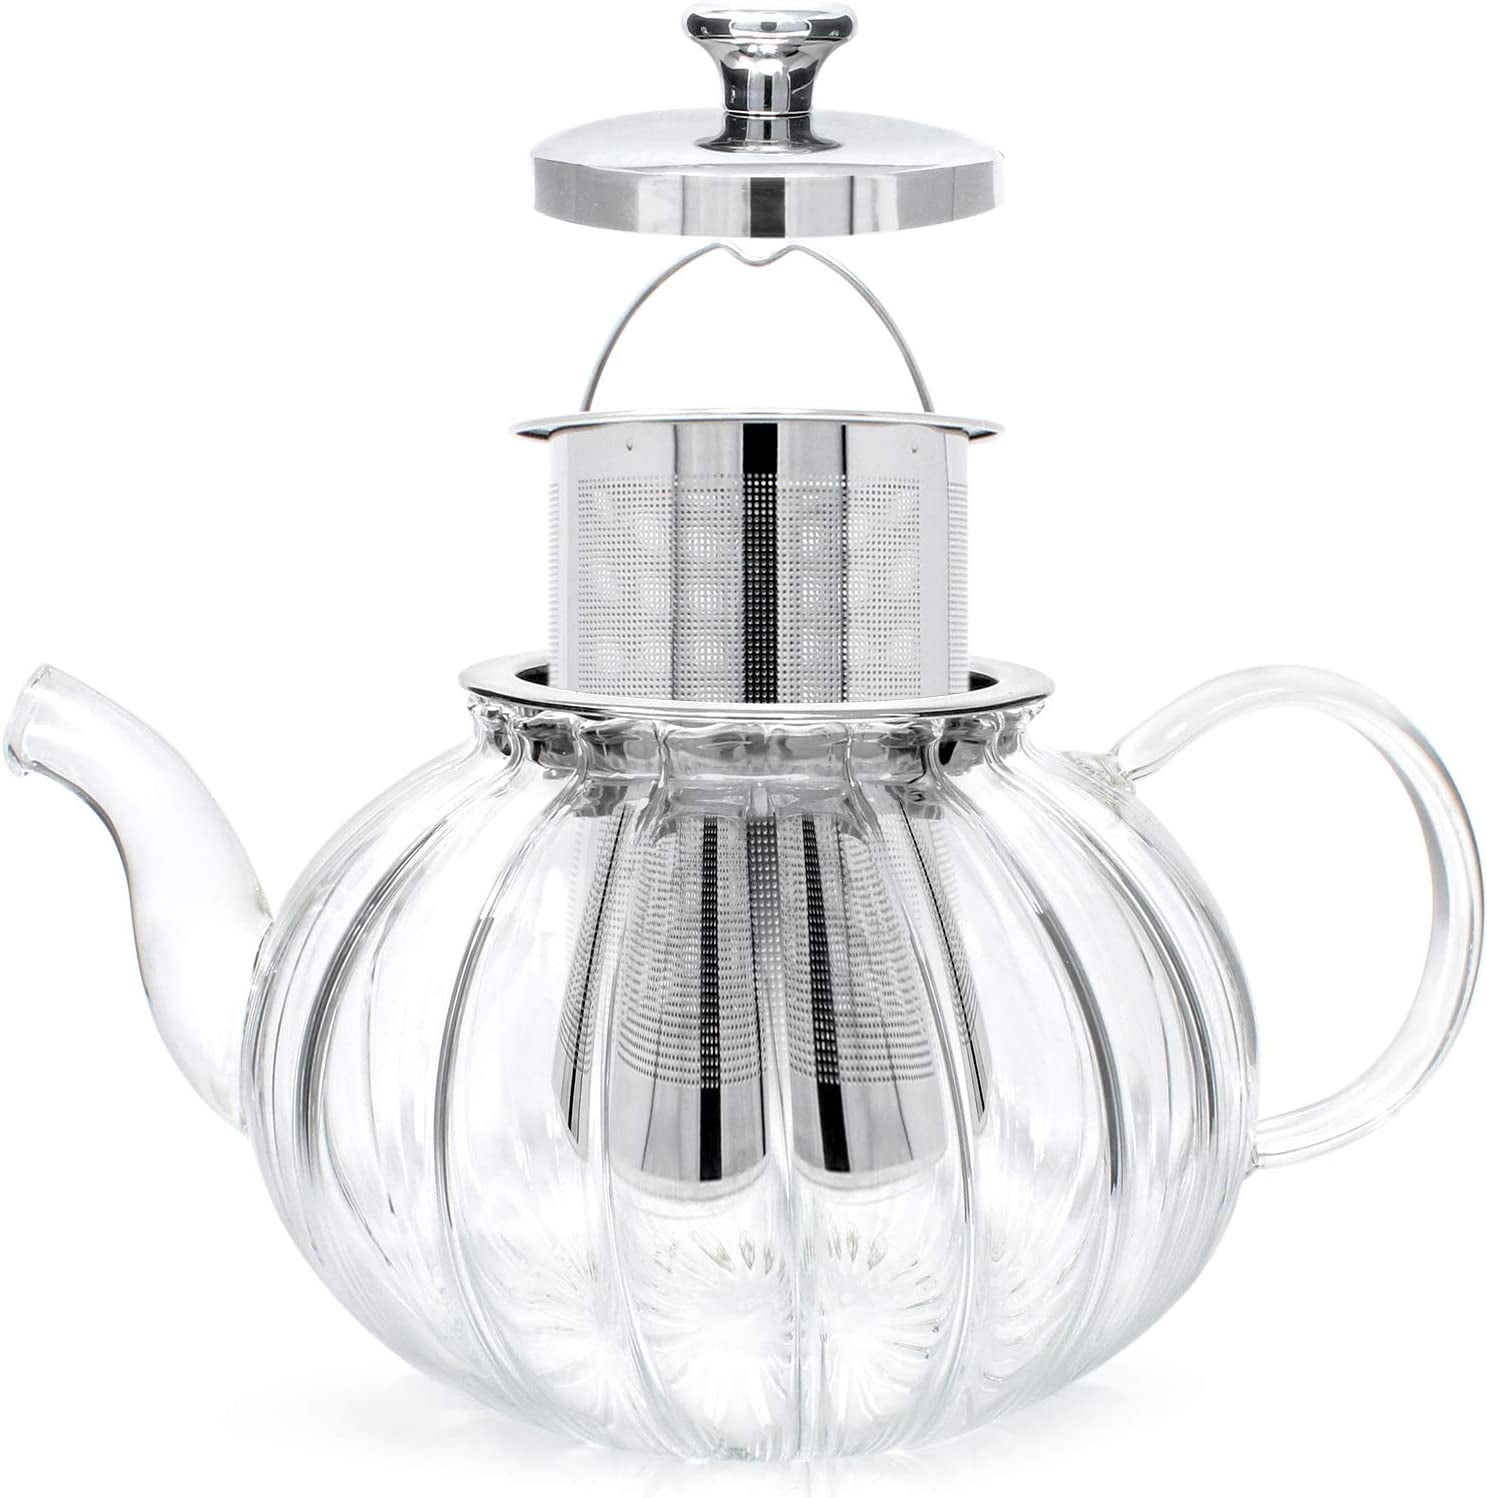 Teabloom Classica Everyday Teapot – Stovetop Safe Glass Teapot – 40 oz /  1200 ml Capacity – Removable Stainless Steel Infuser